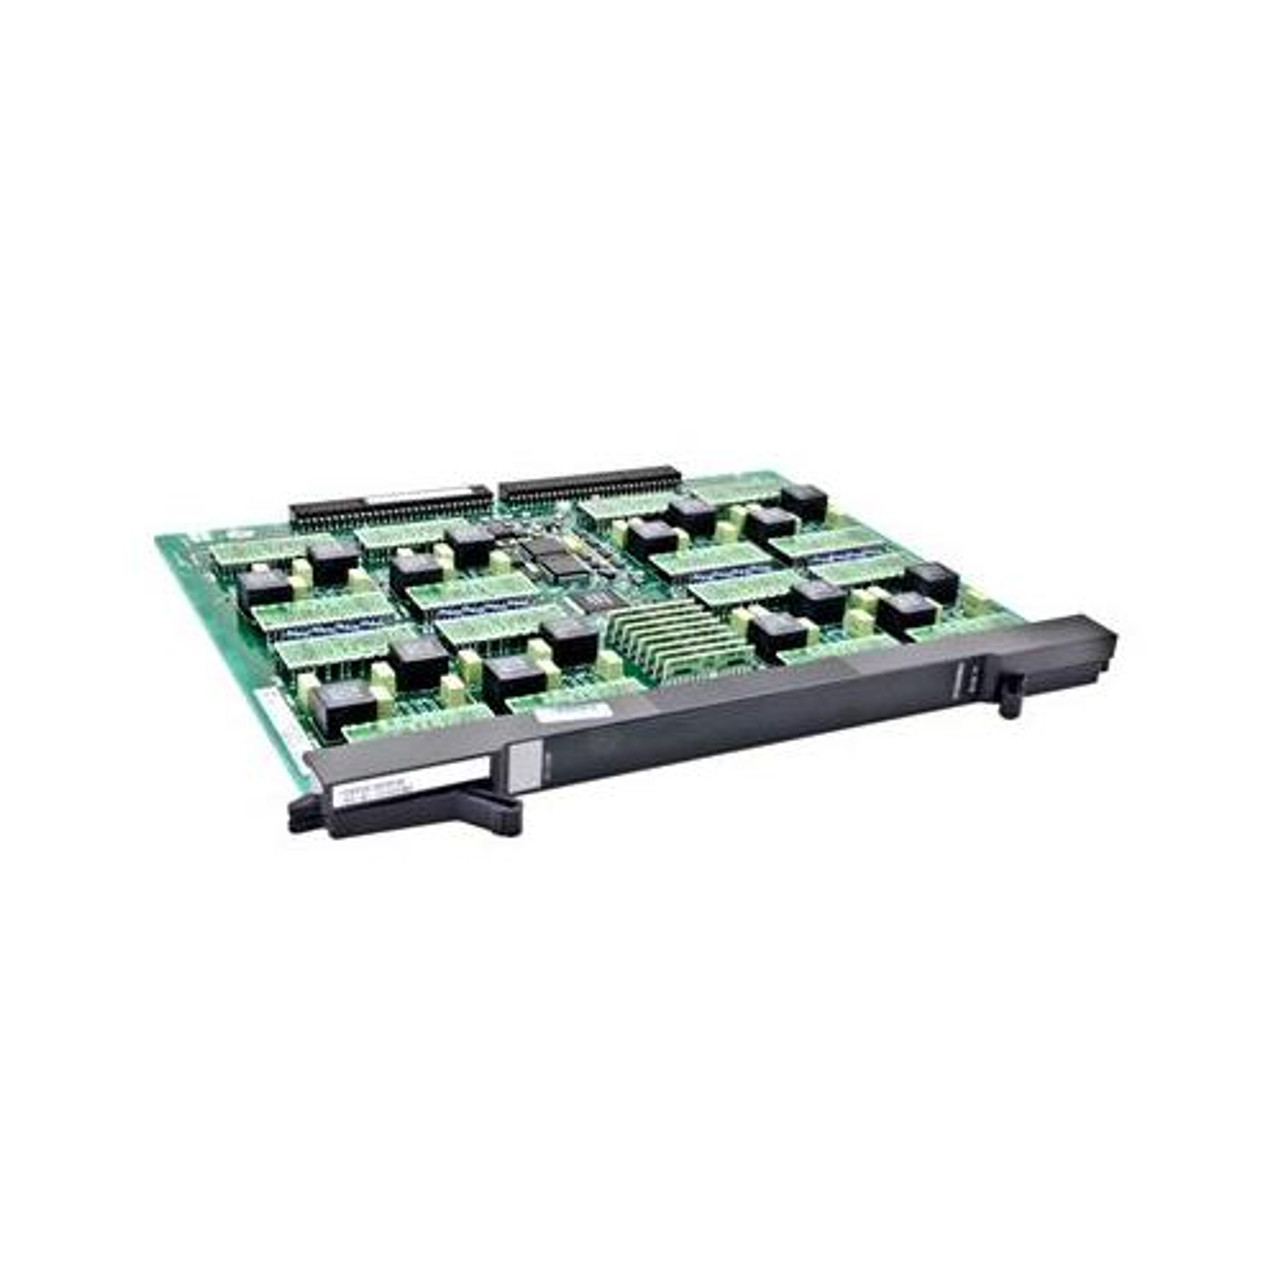 01-SSC-4739 SonicWALL Scrutinizer Msp Module From 25 To 50 Nodes (Refurbished)